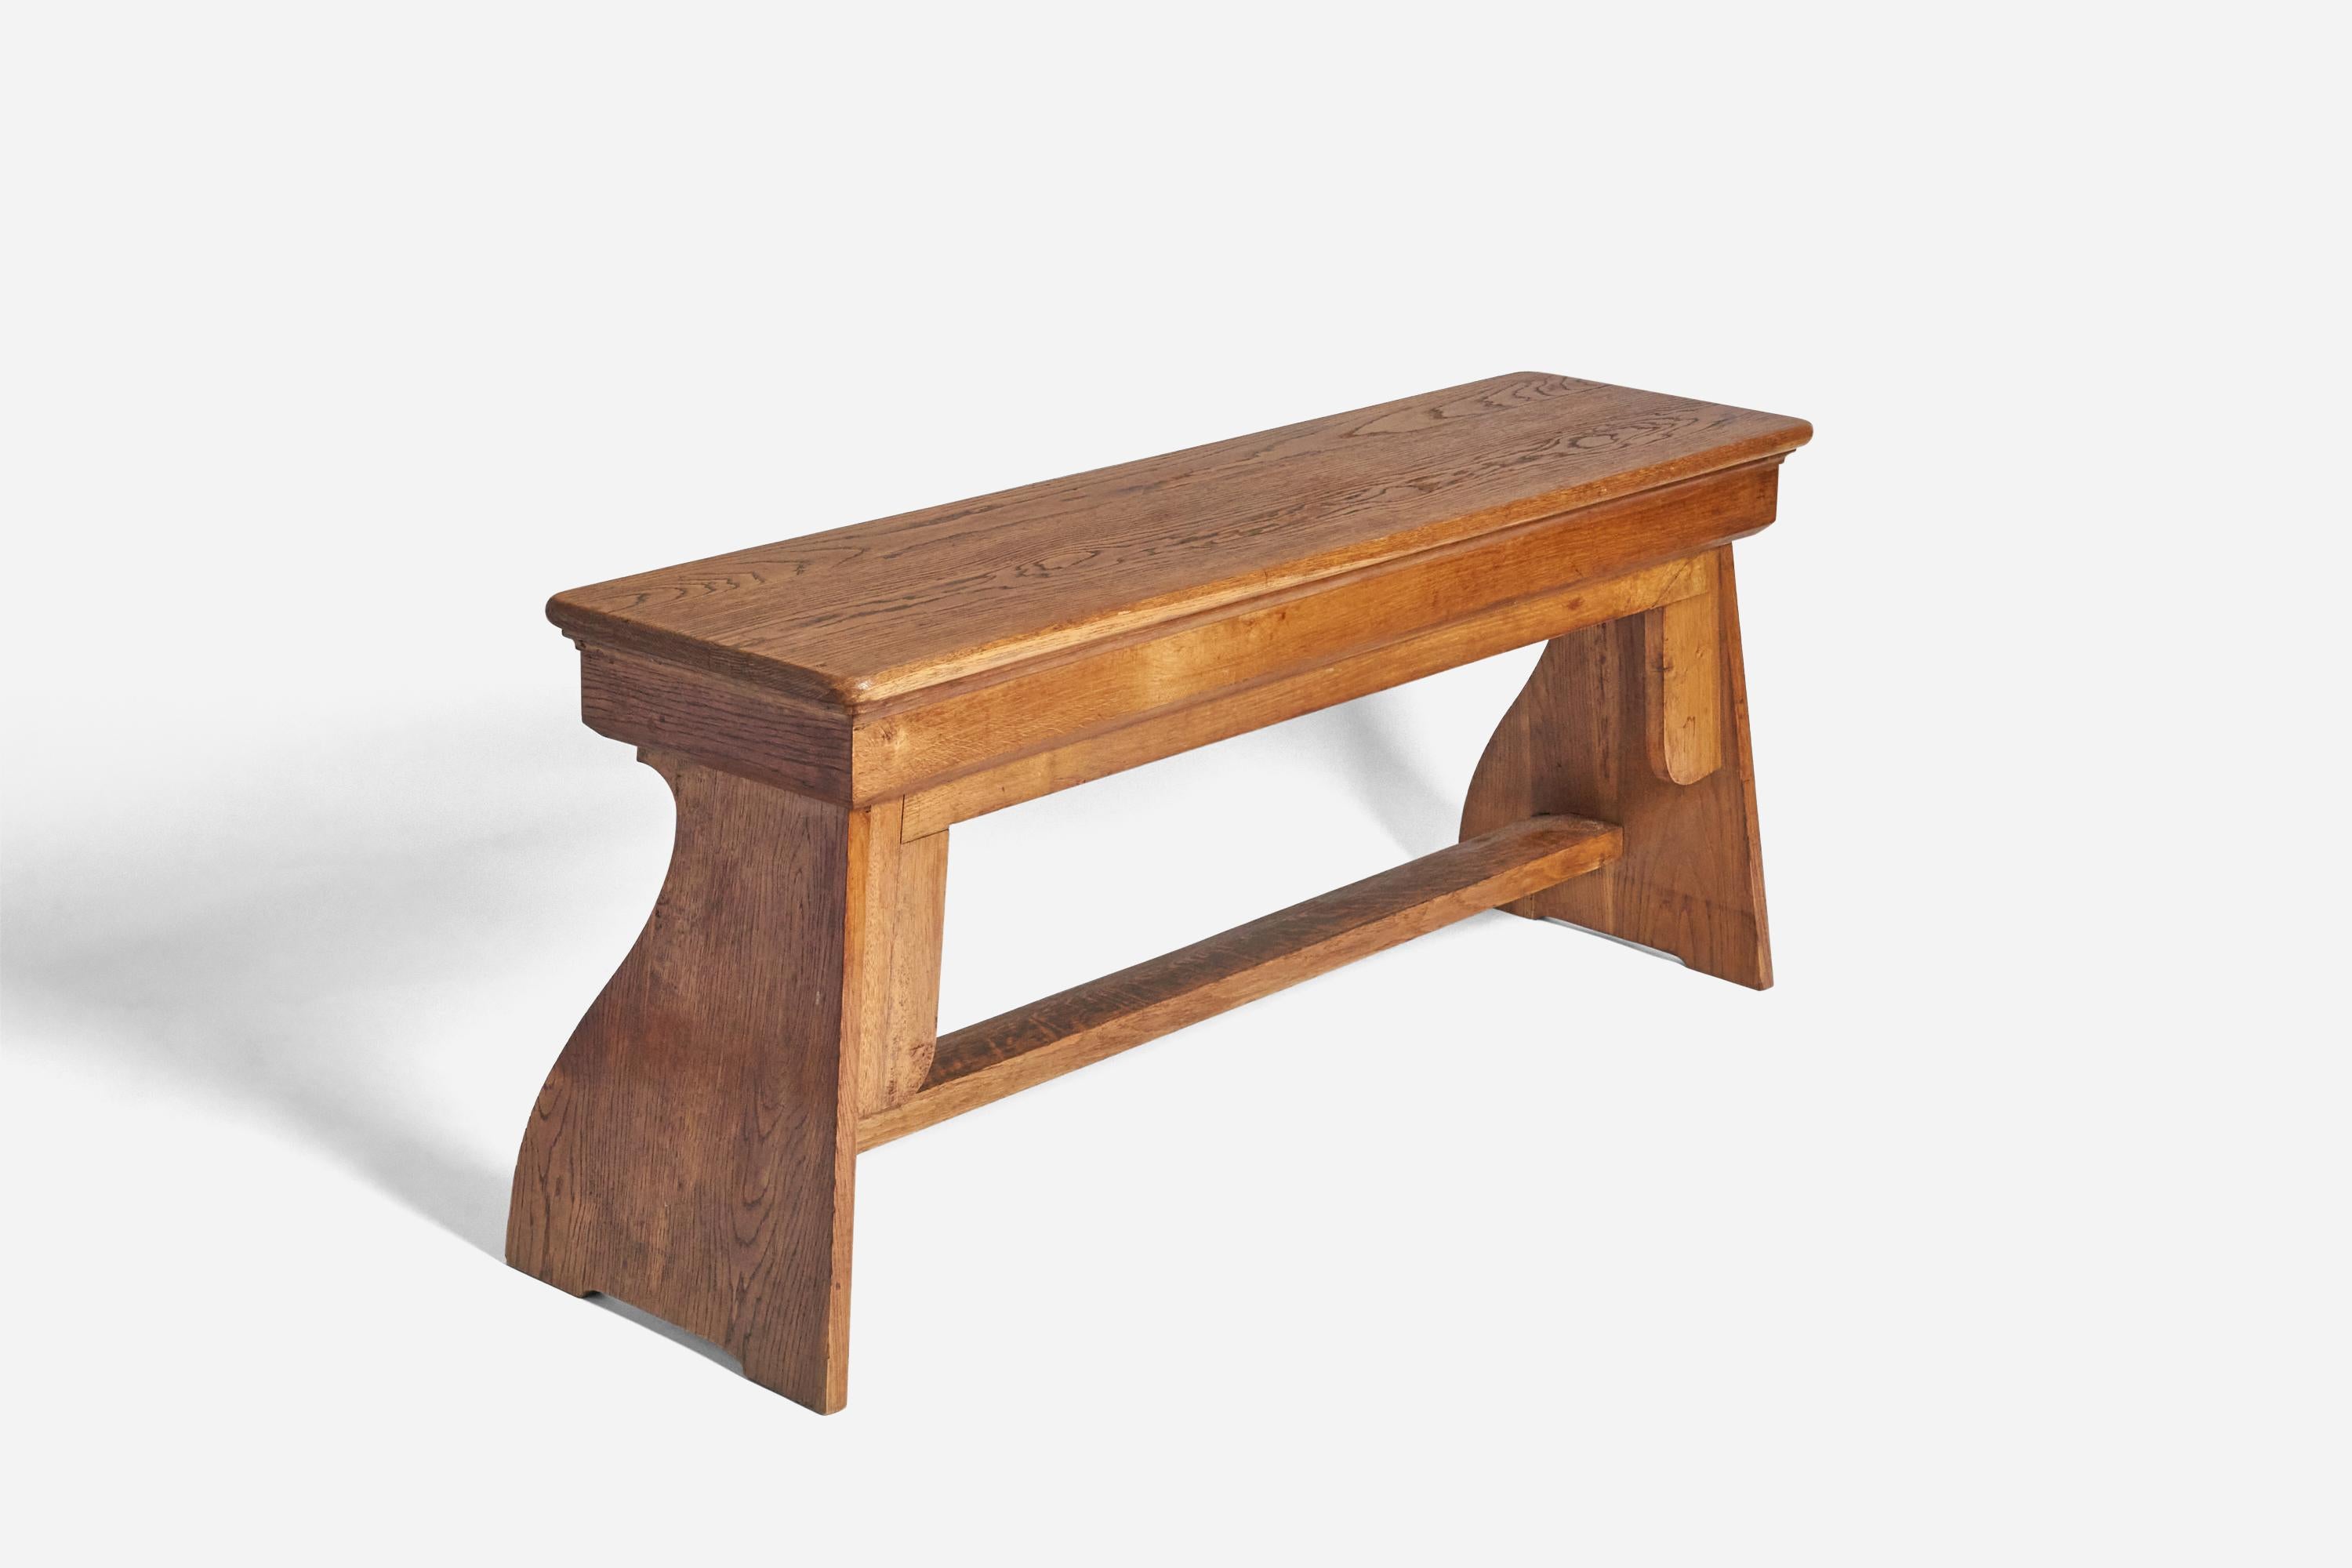 A sizable, solid oak bench designed and produced in Sweden, c. 1920s. 